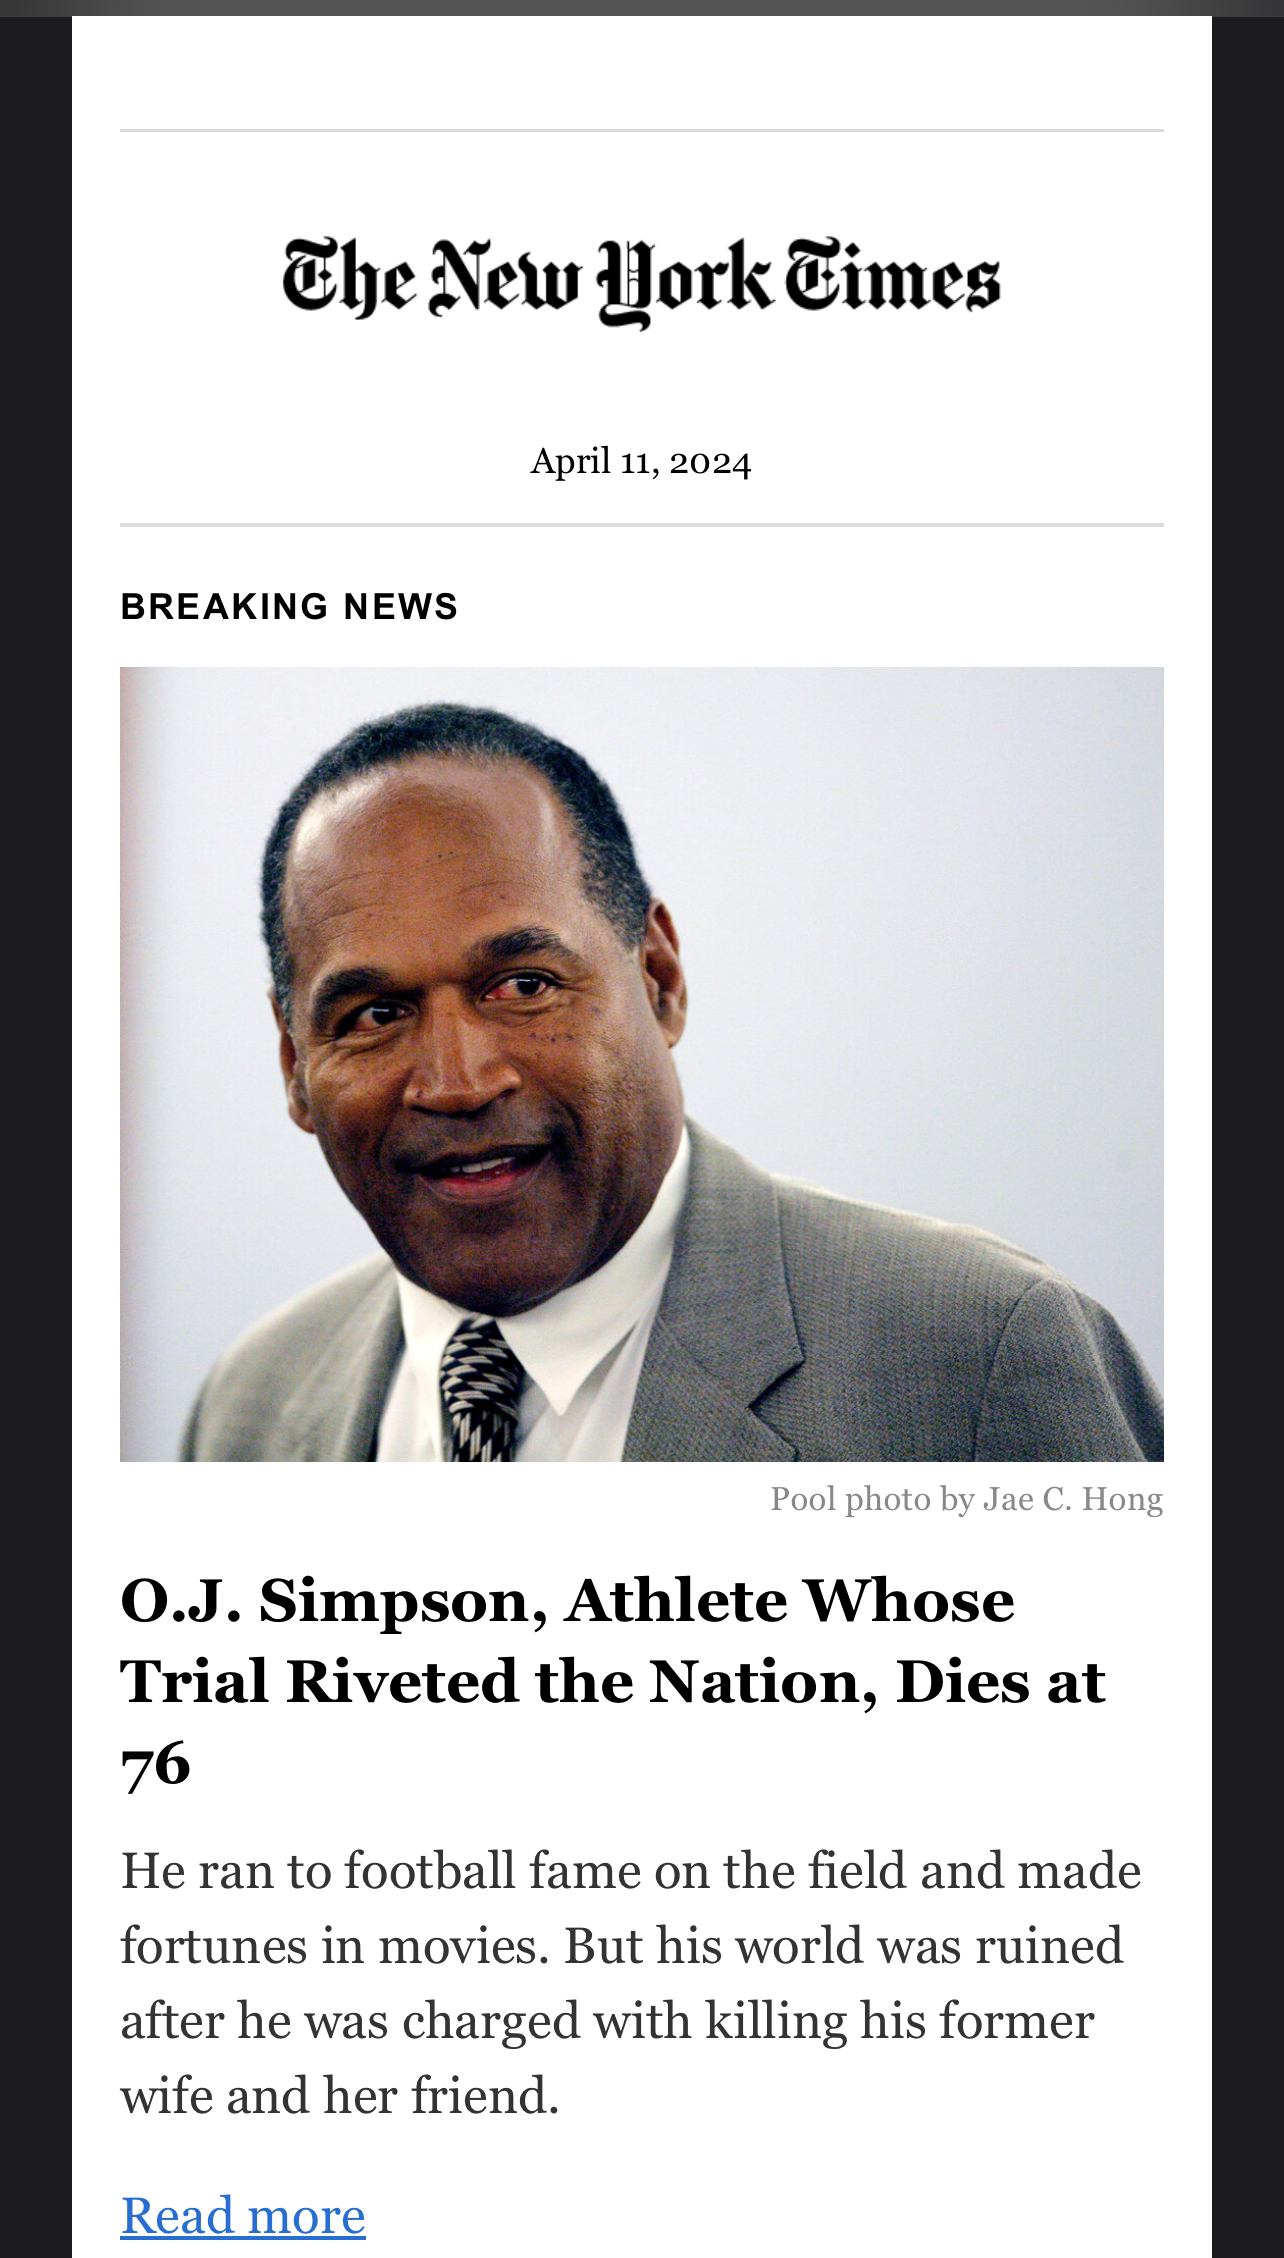 A leadership lesson from the death of OJ Simpson